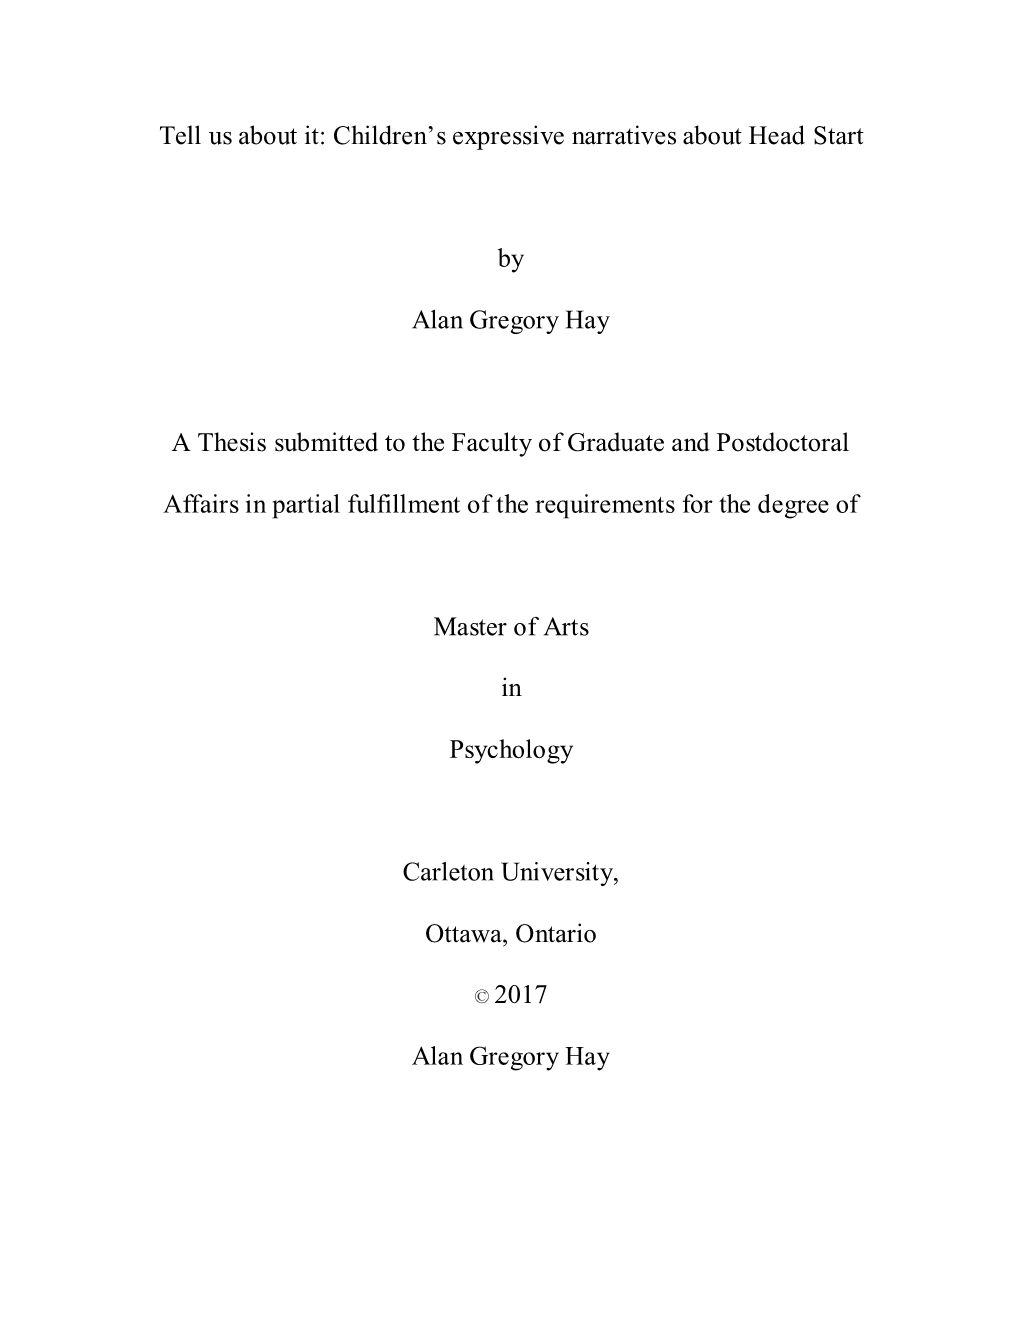 Children's Expressive Narratives About Head Start by Alan Gregory Hay A